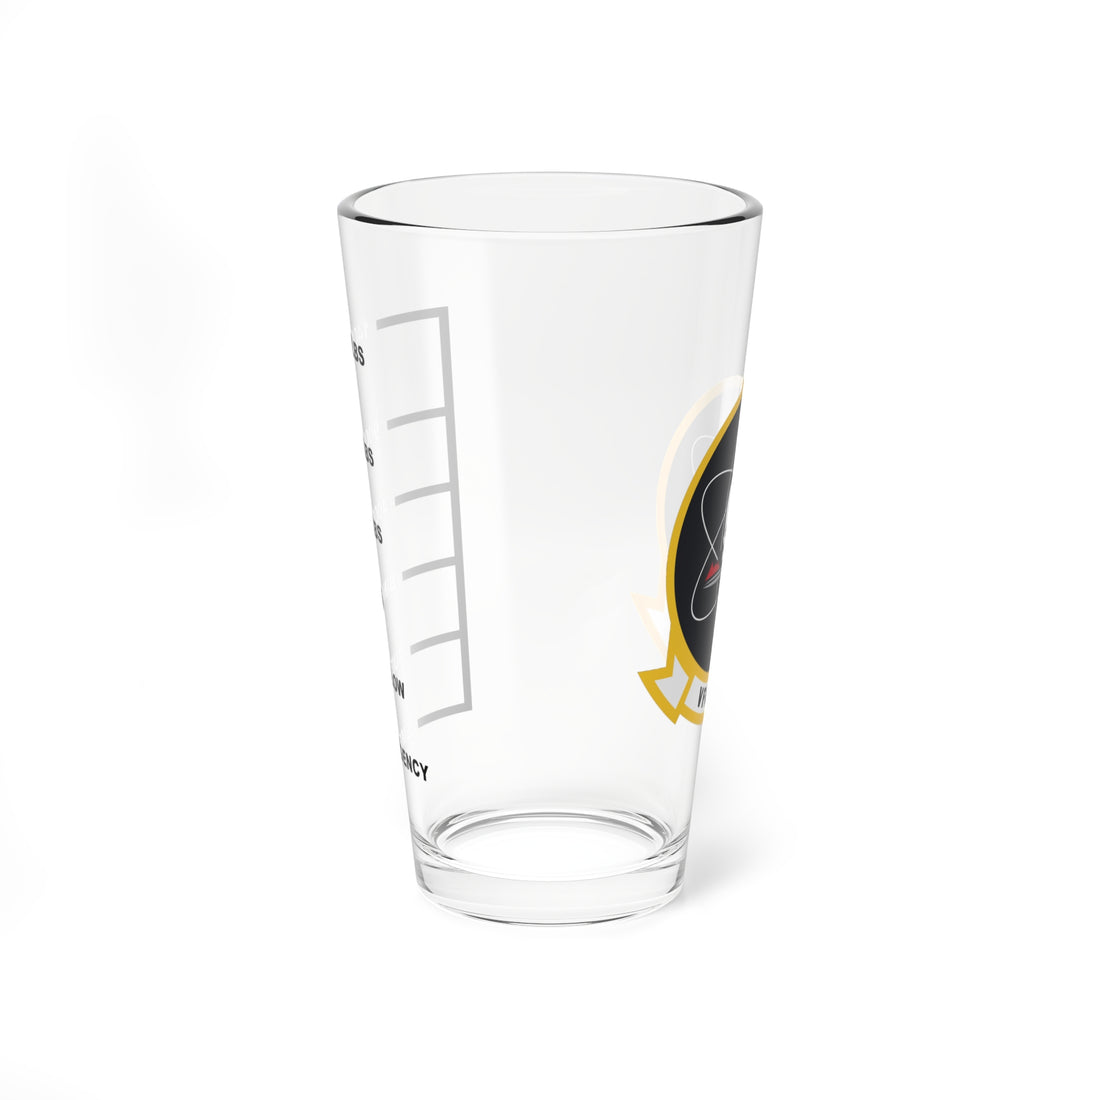 VFA-151 "Vigilantes" Fuel Low Pint Glass, Navy Strike Fighter Squadron flying the F/A-18 Hornet